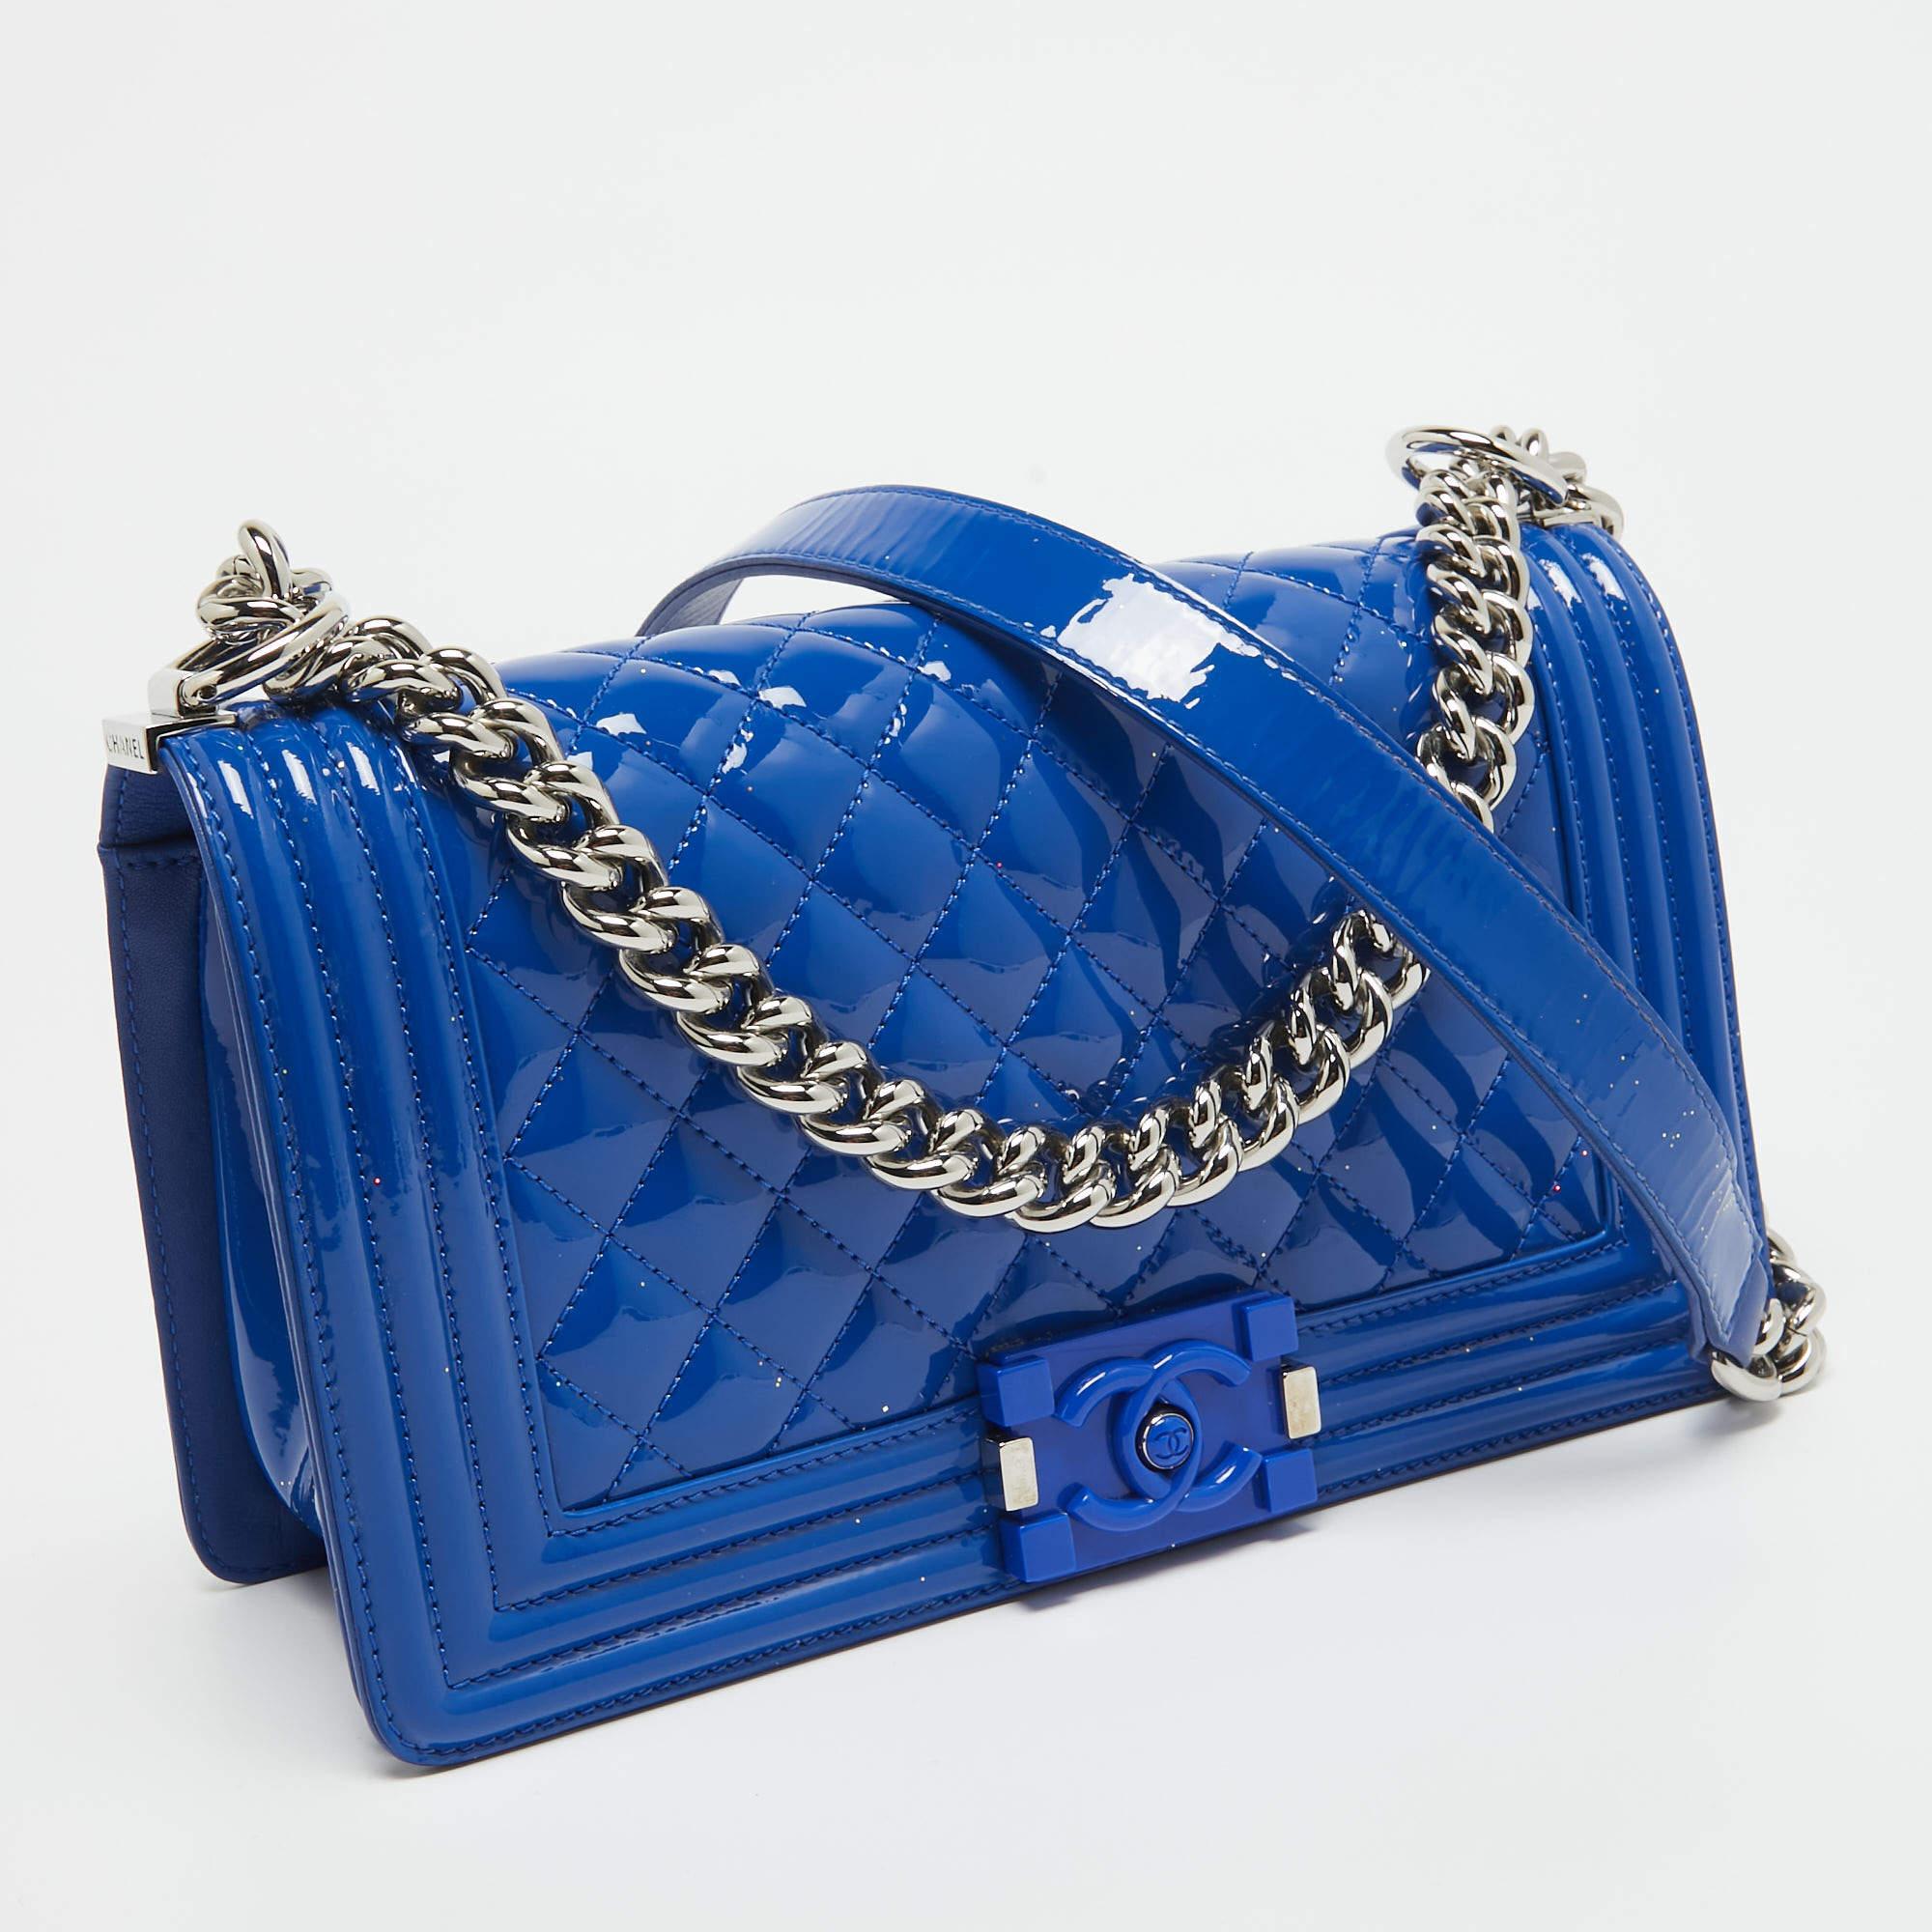 Chanel Blue Quilted Patent Leather Medium Boy Flap Bag In Good Condition For Sale In Dubai, Al Qouz 2